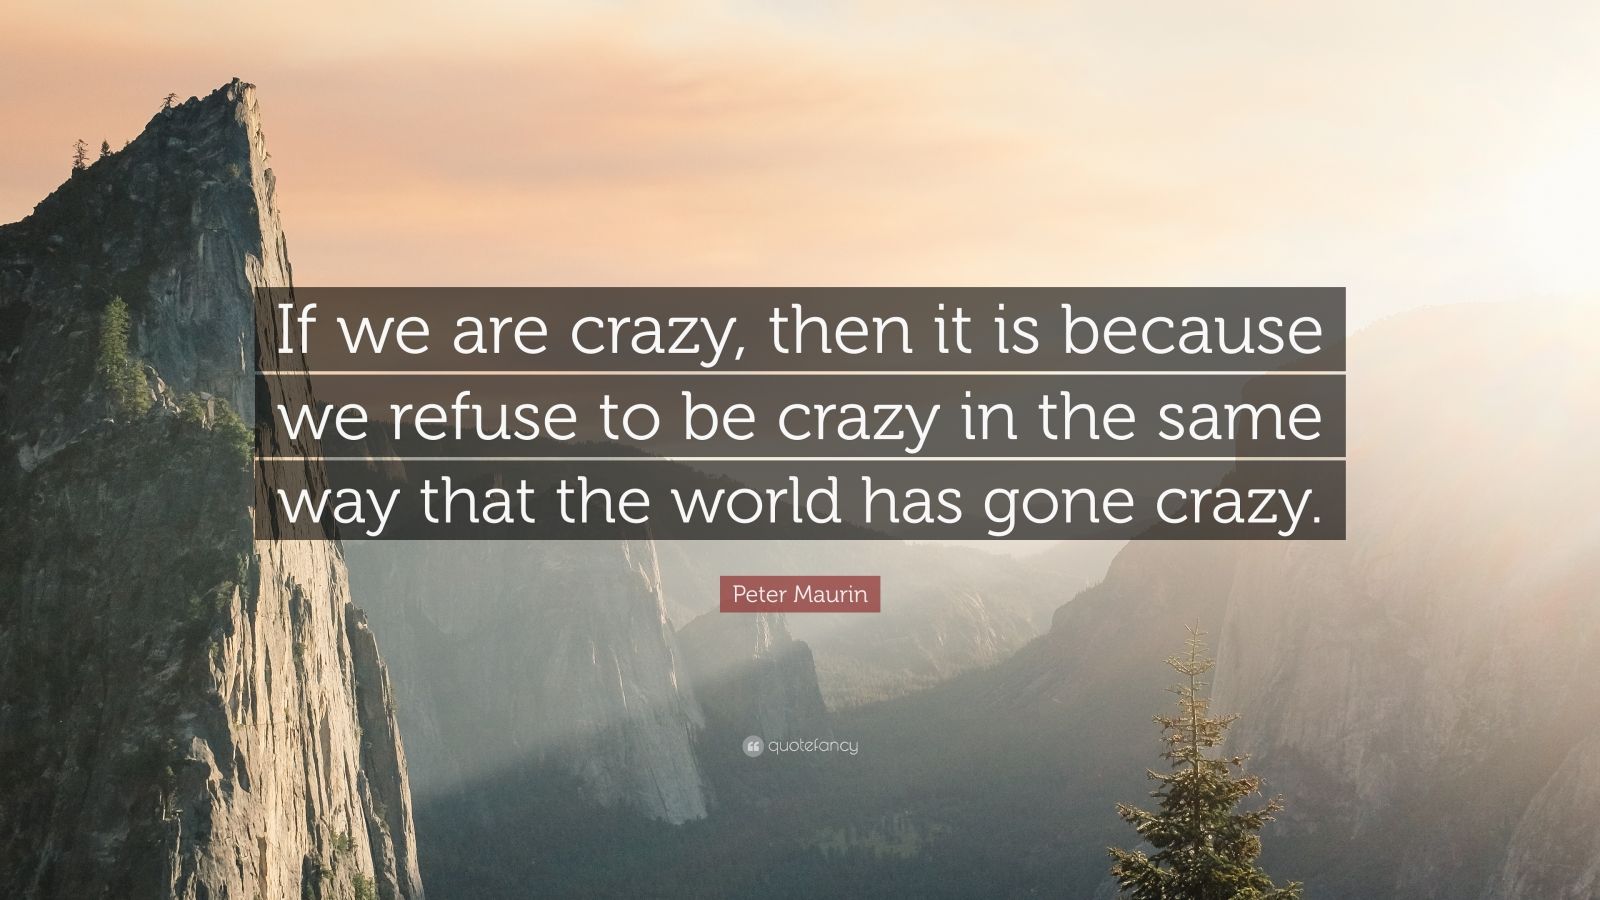 Peter Maurin Quote: "If we are crazy, then it is because ...